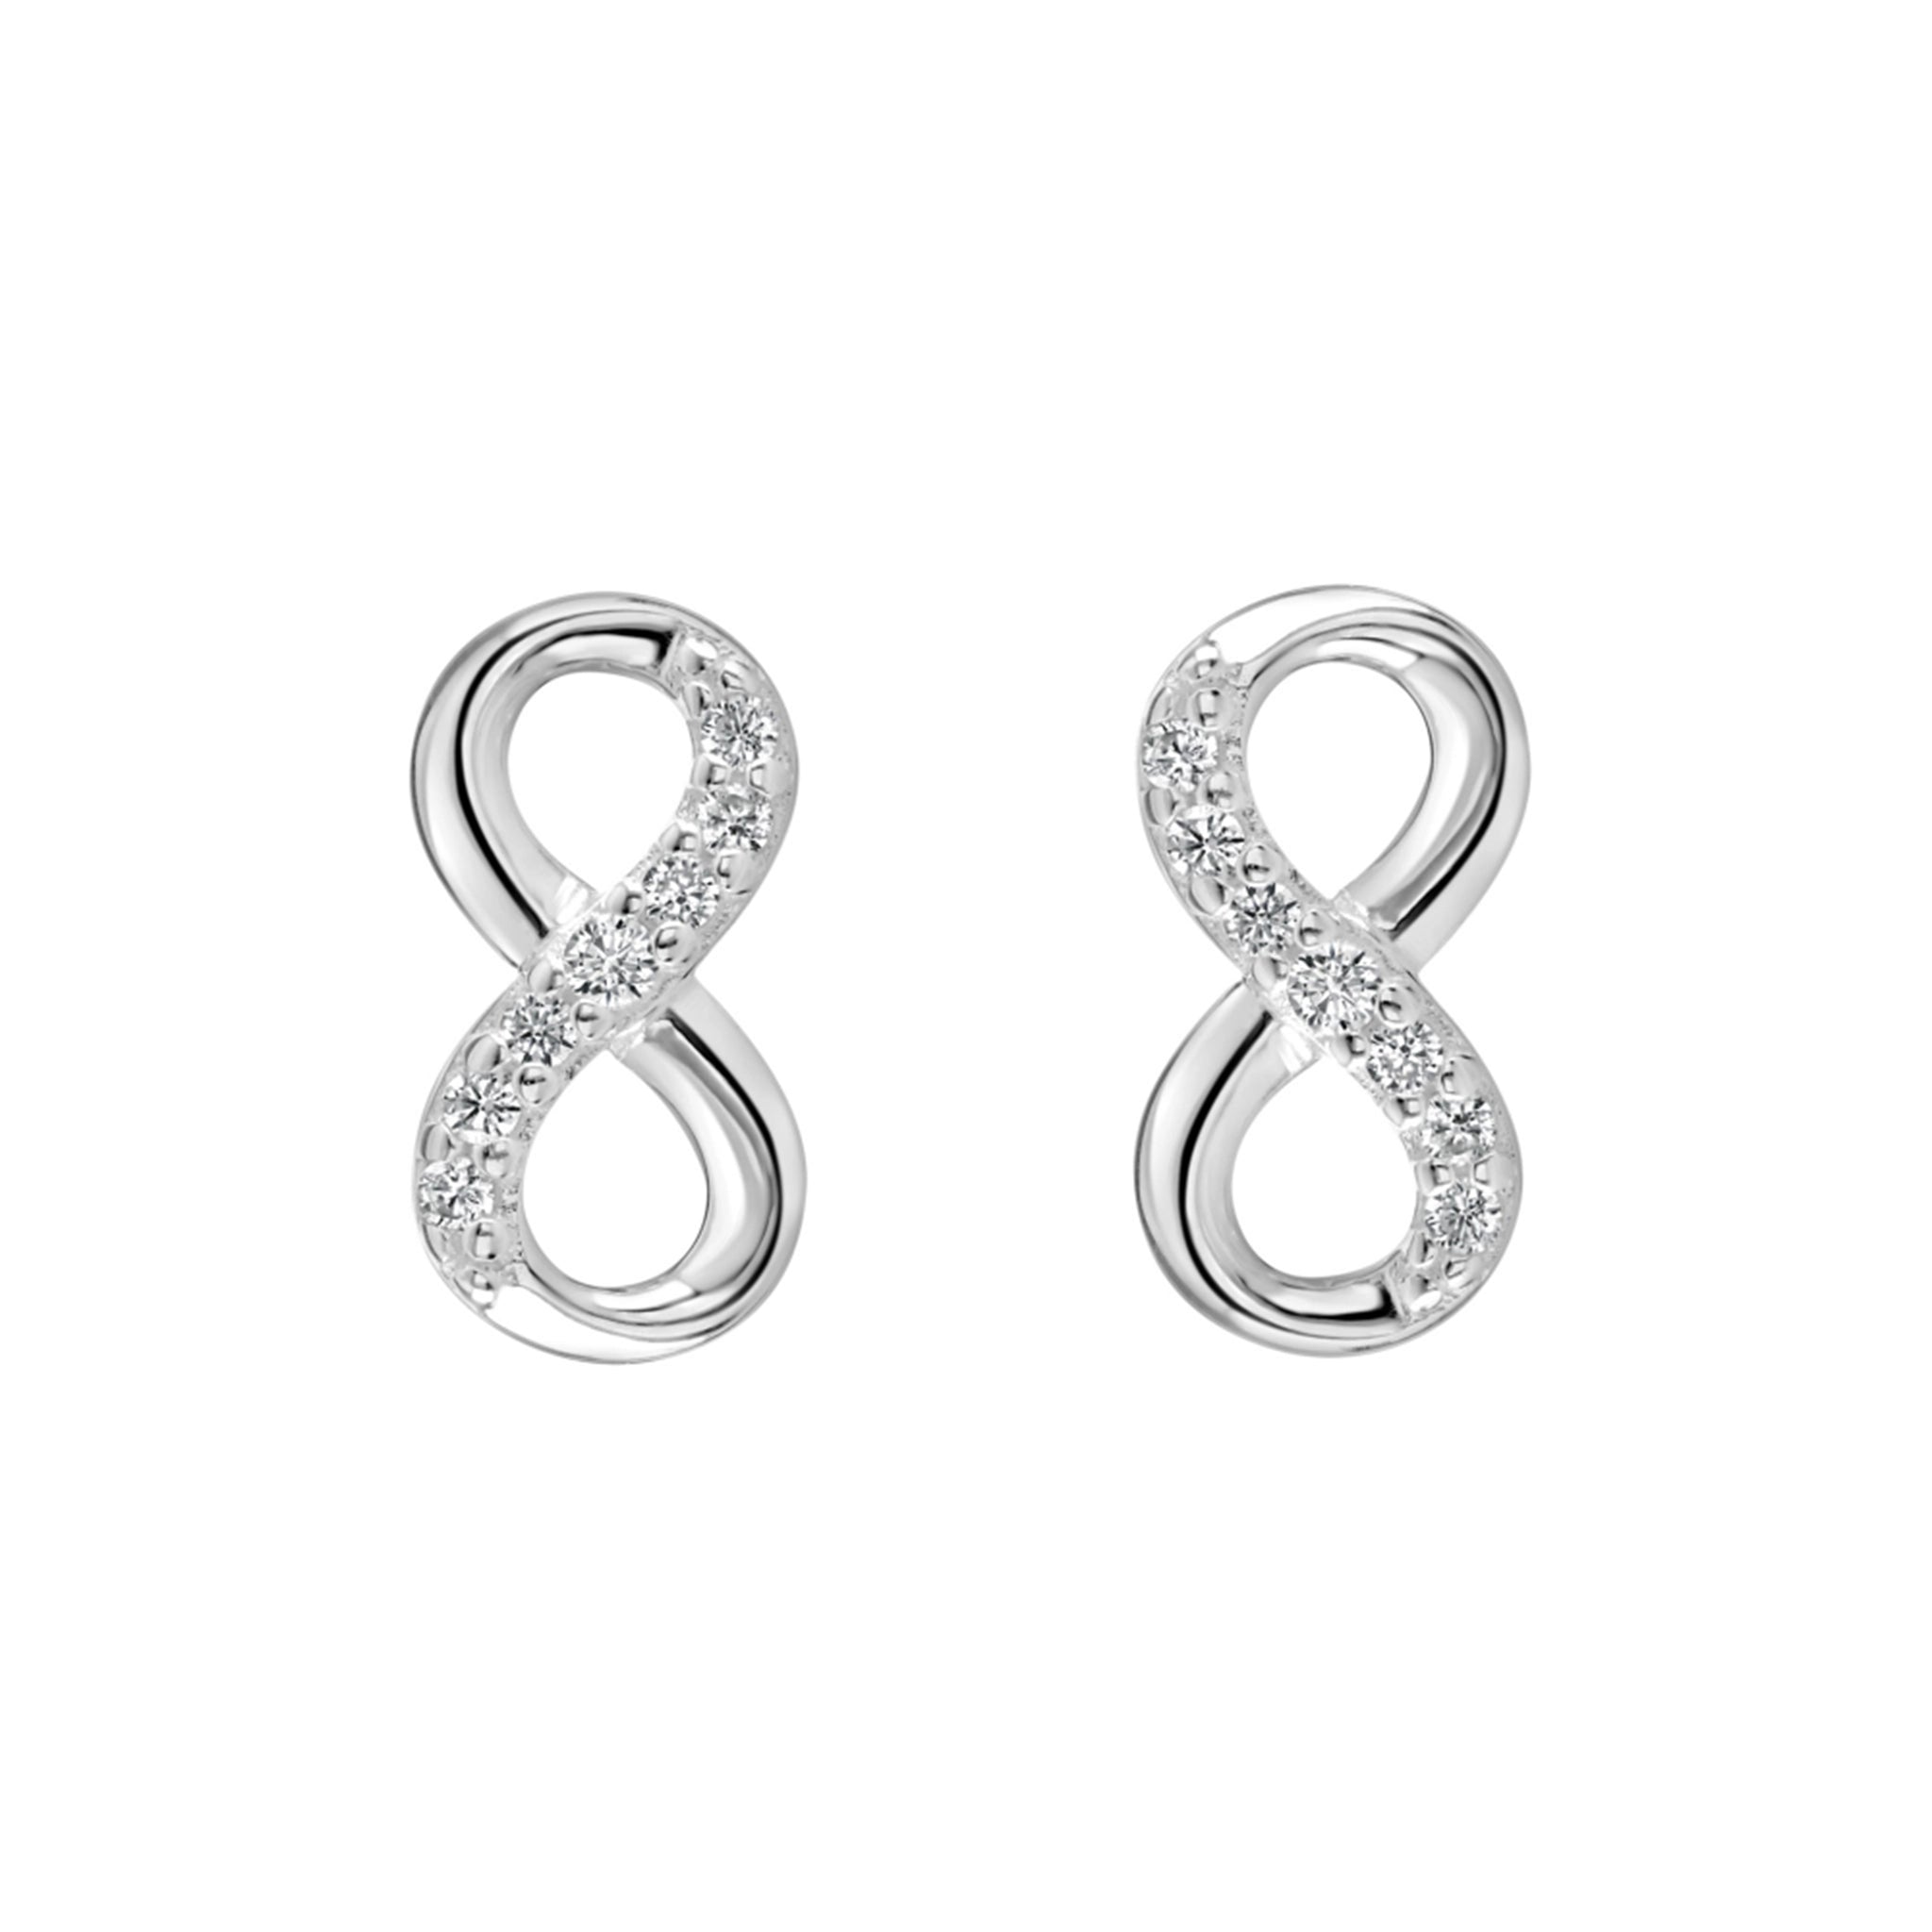 A pair of infinity symbol stud earrings with CZ stones